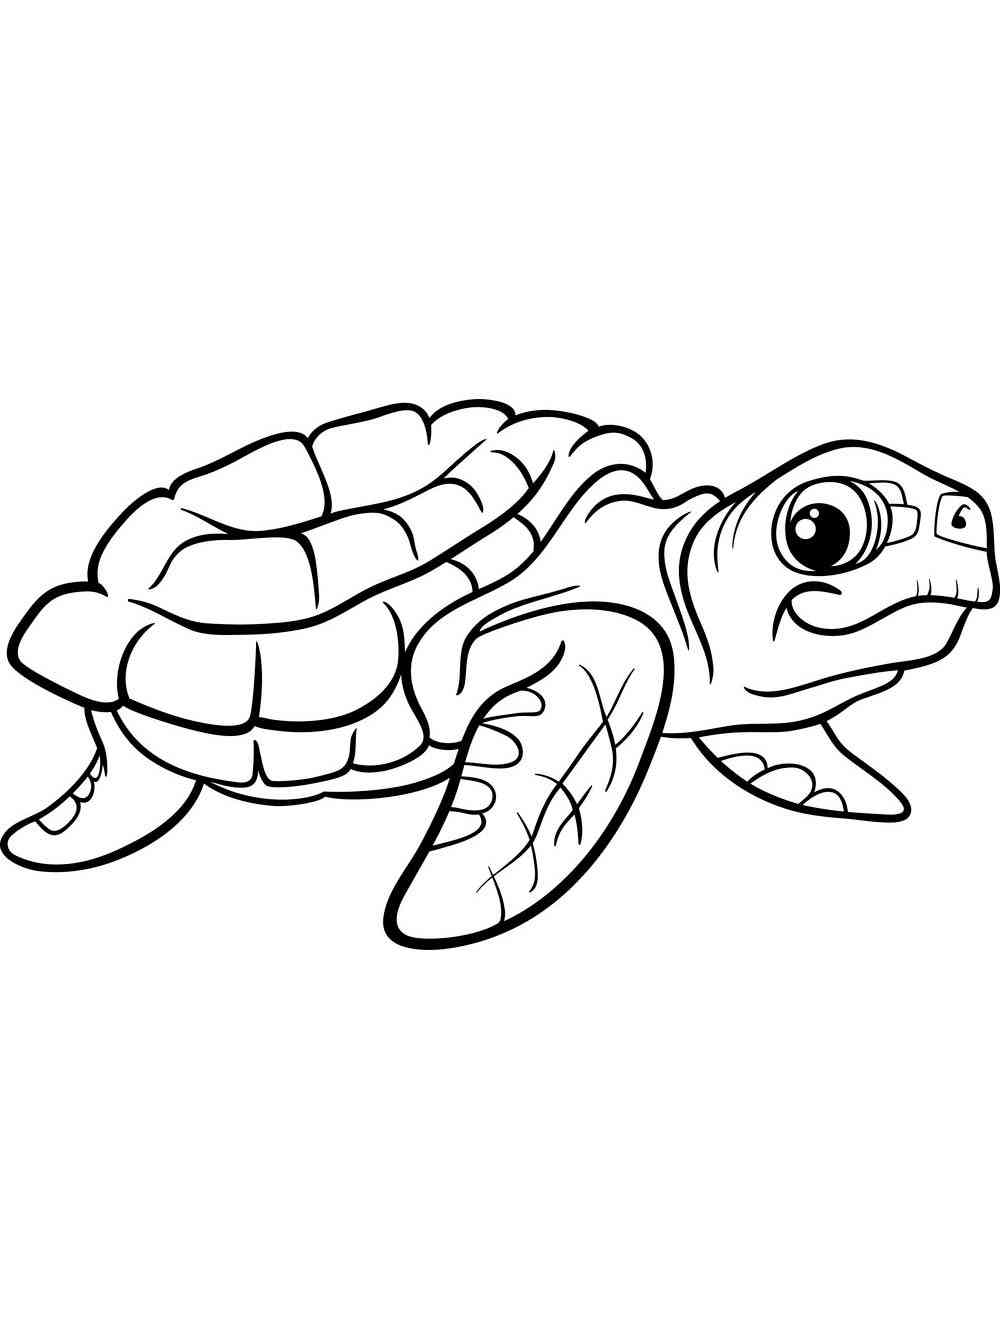 Sea Turtles Pages Stress Coloring Pages